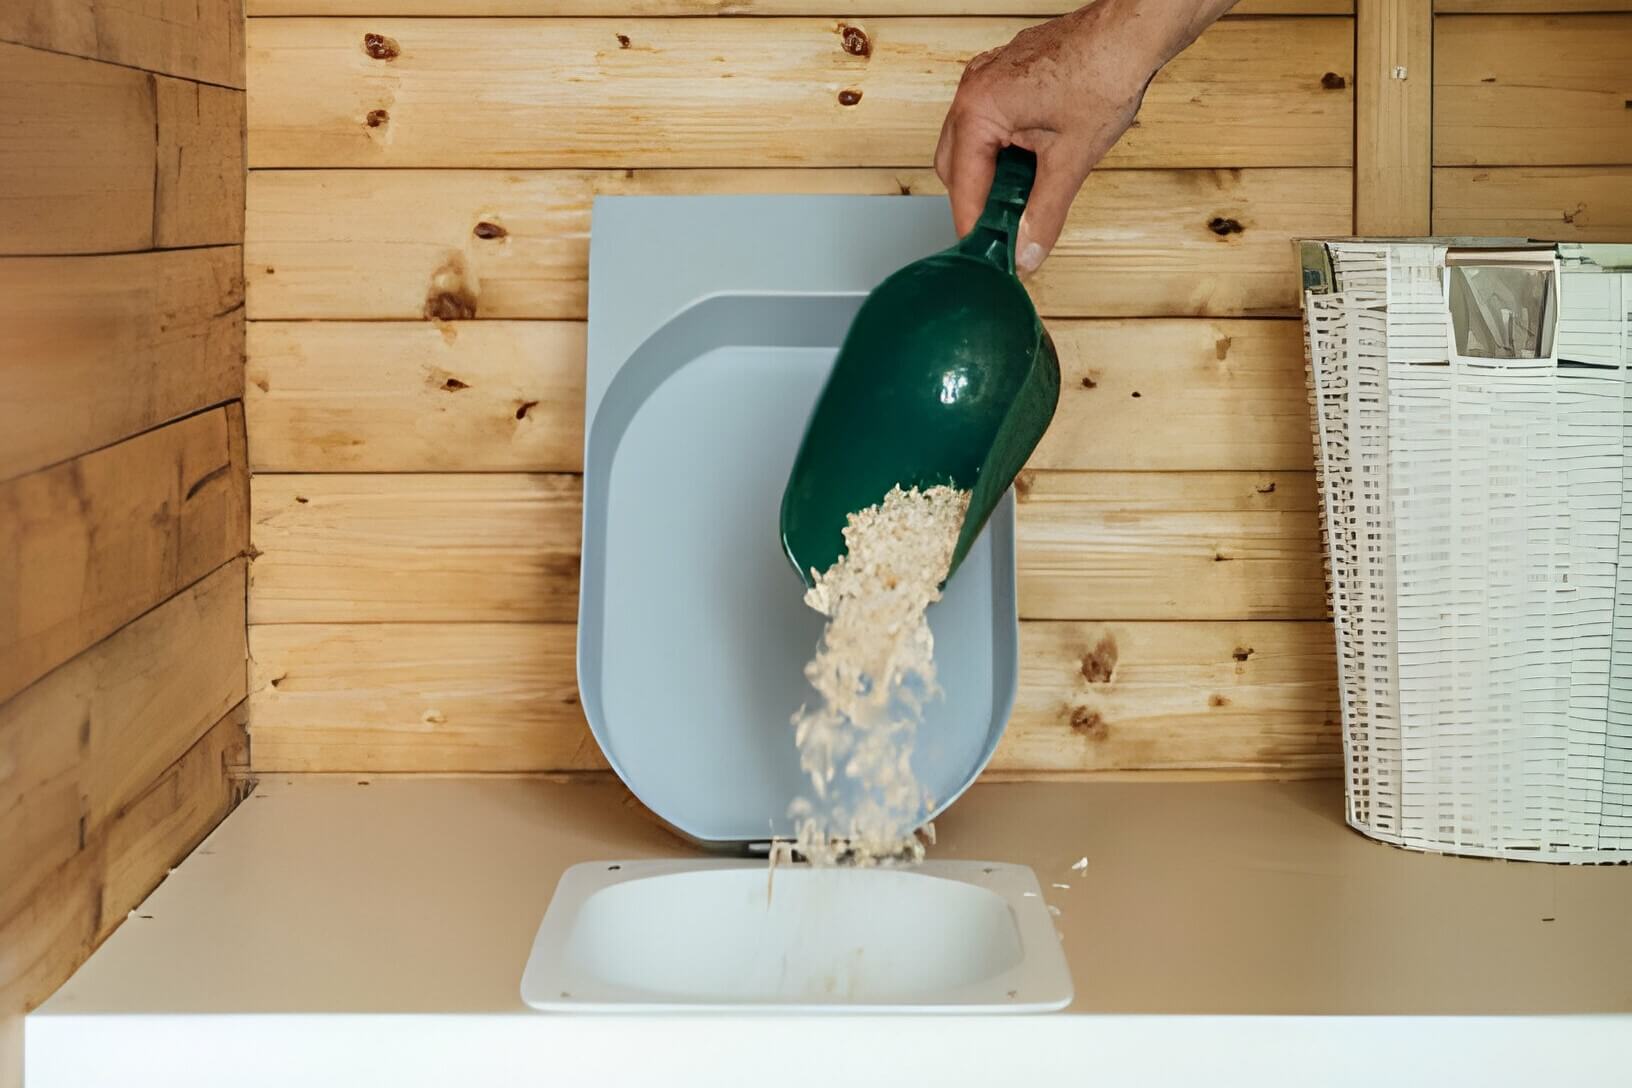 sawdust being poured into a composting toilet